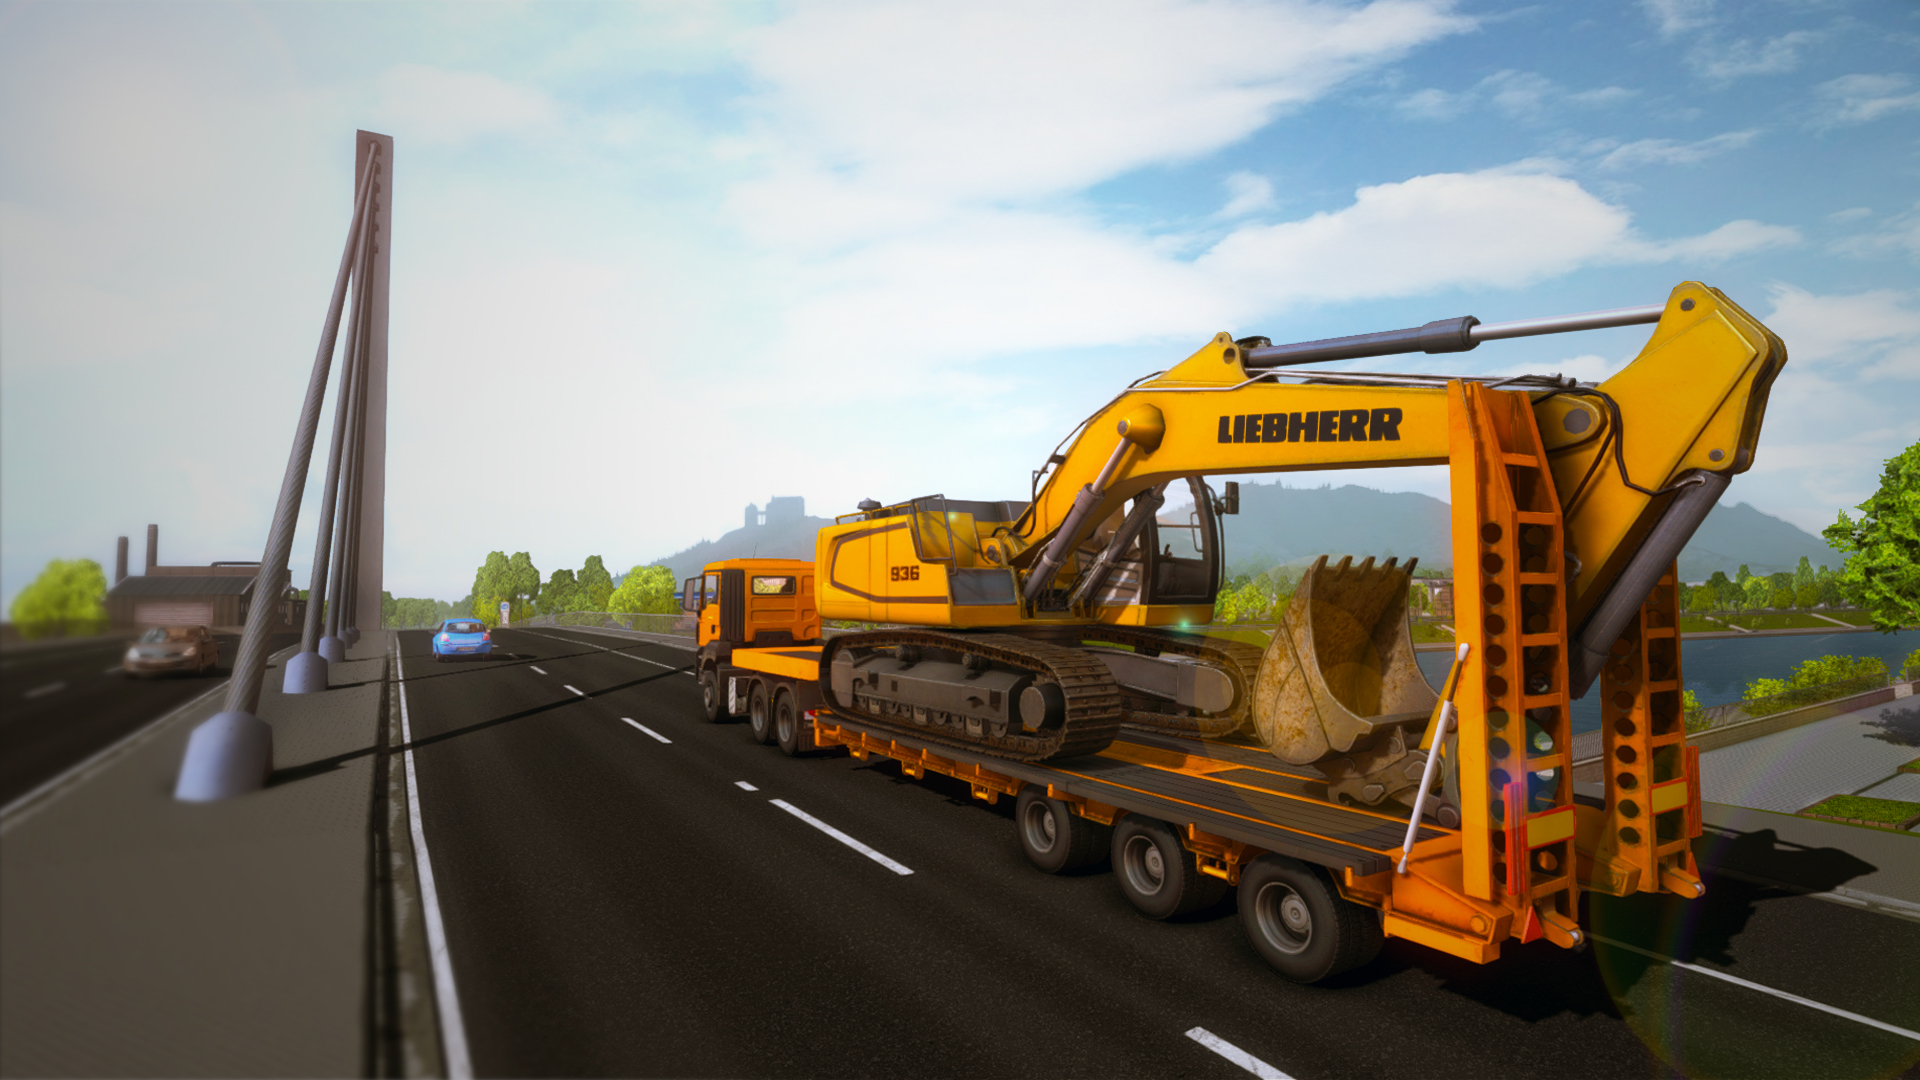 download the last version for ios OffRoad Construction Simulator 3D - Heavy Builders